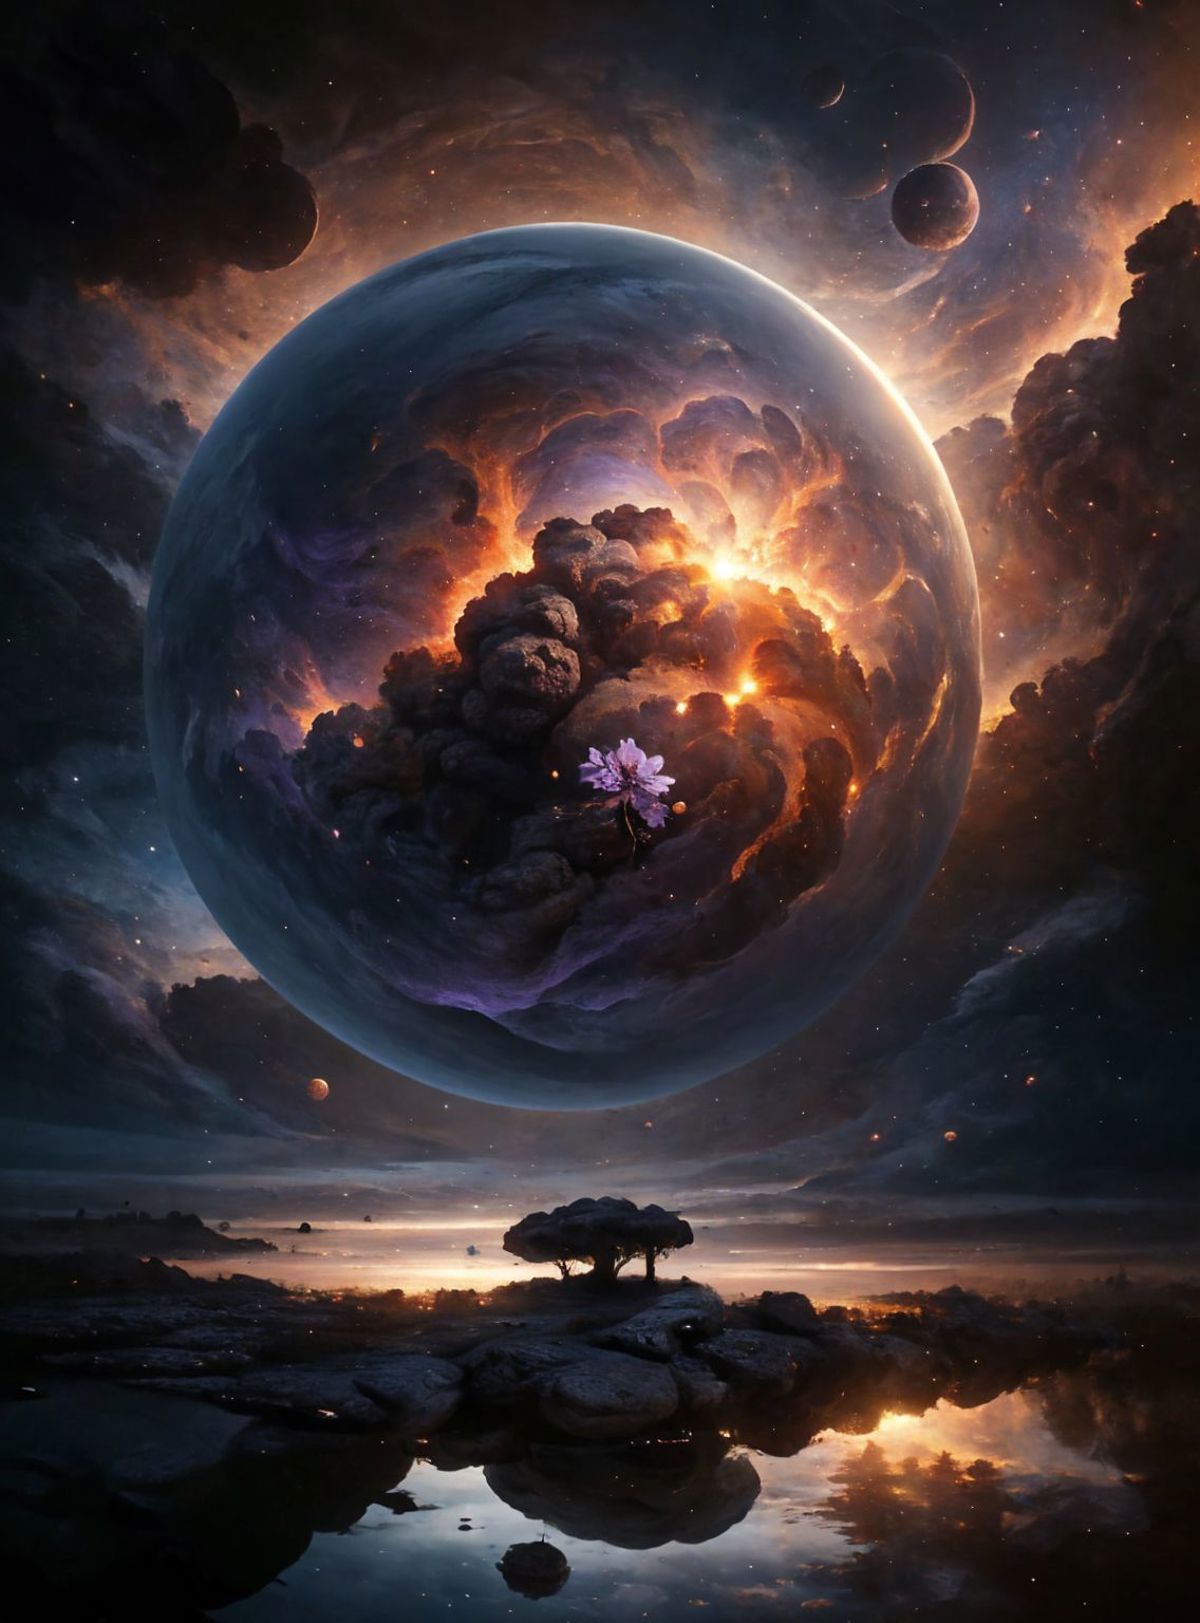 A surreal painting of a planet with a purple flower in the center.